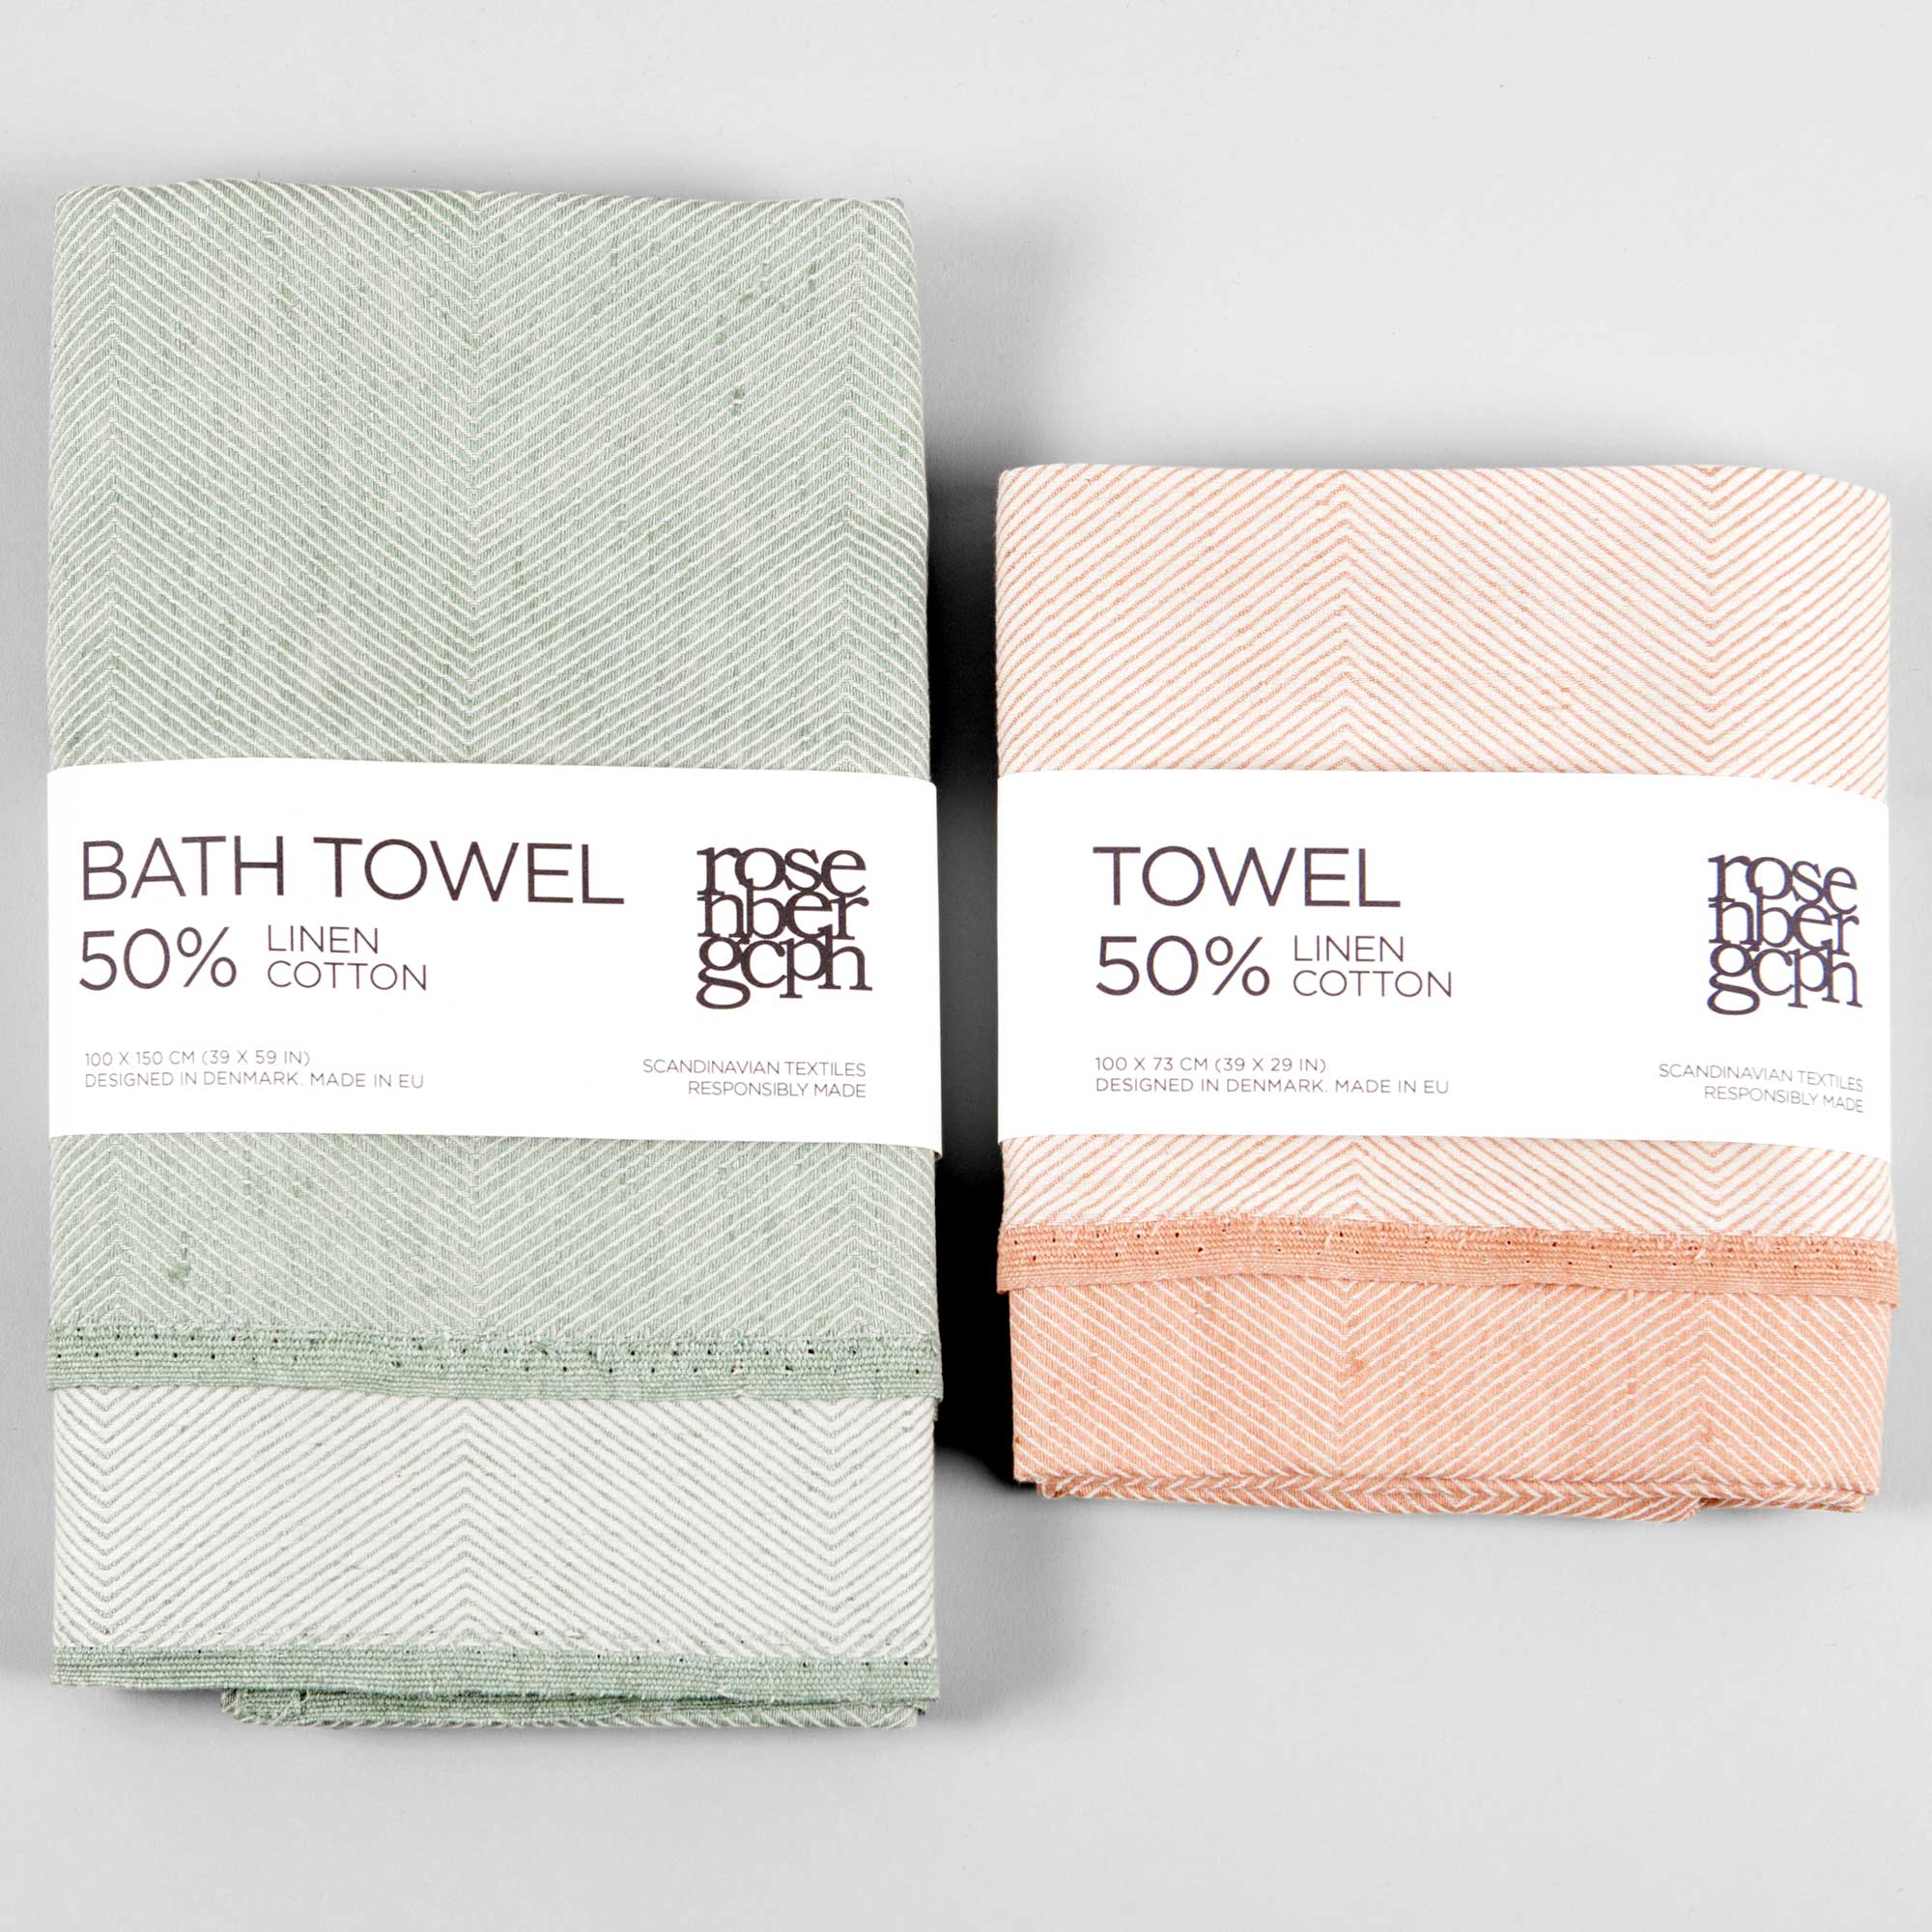 Bath towel and towel in green and coral